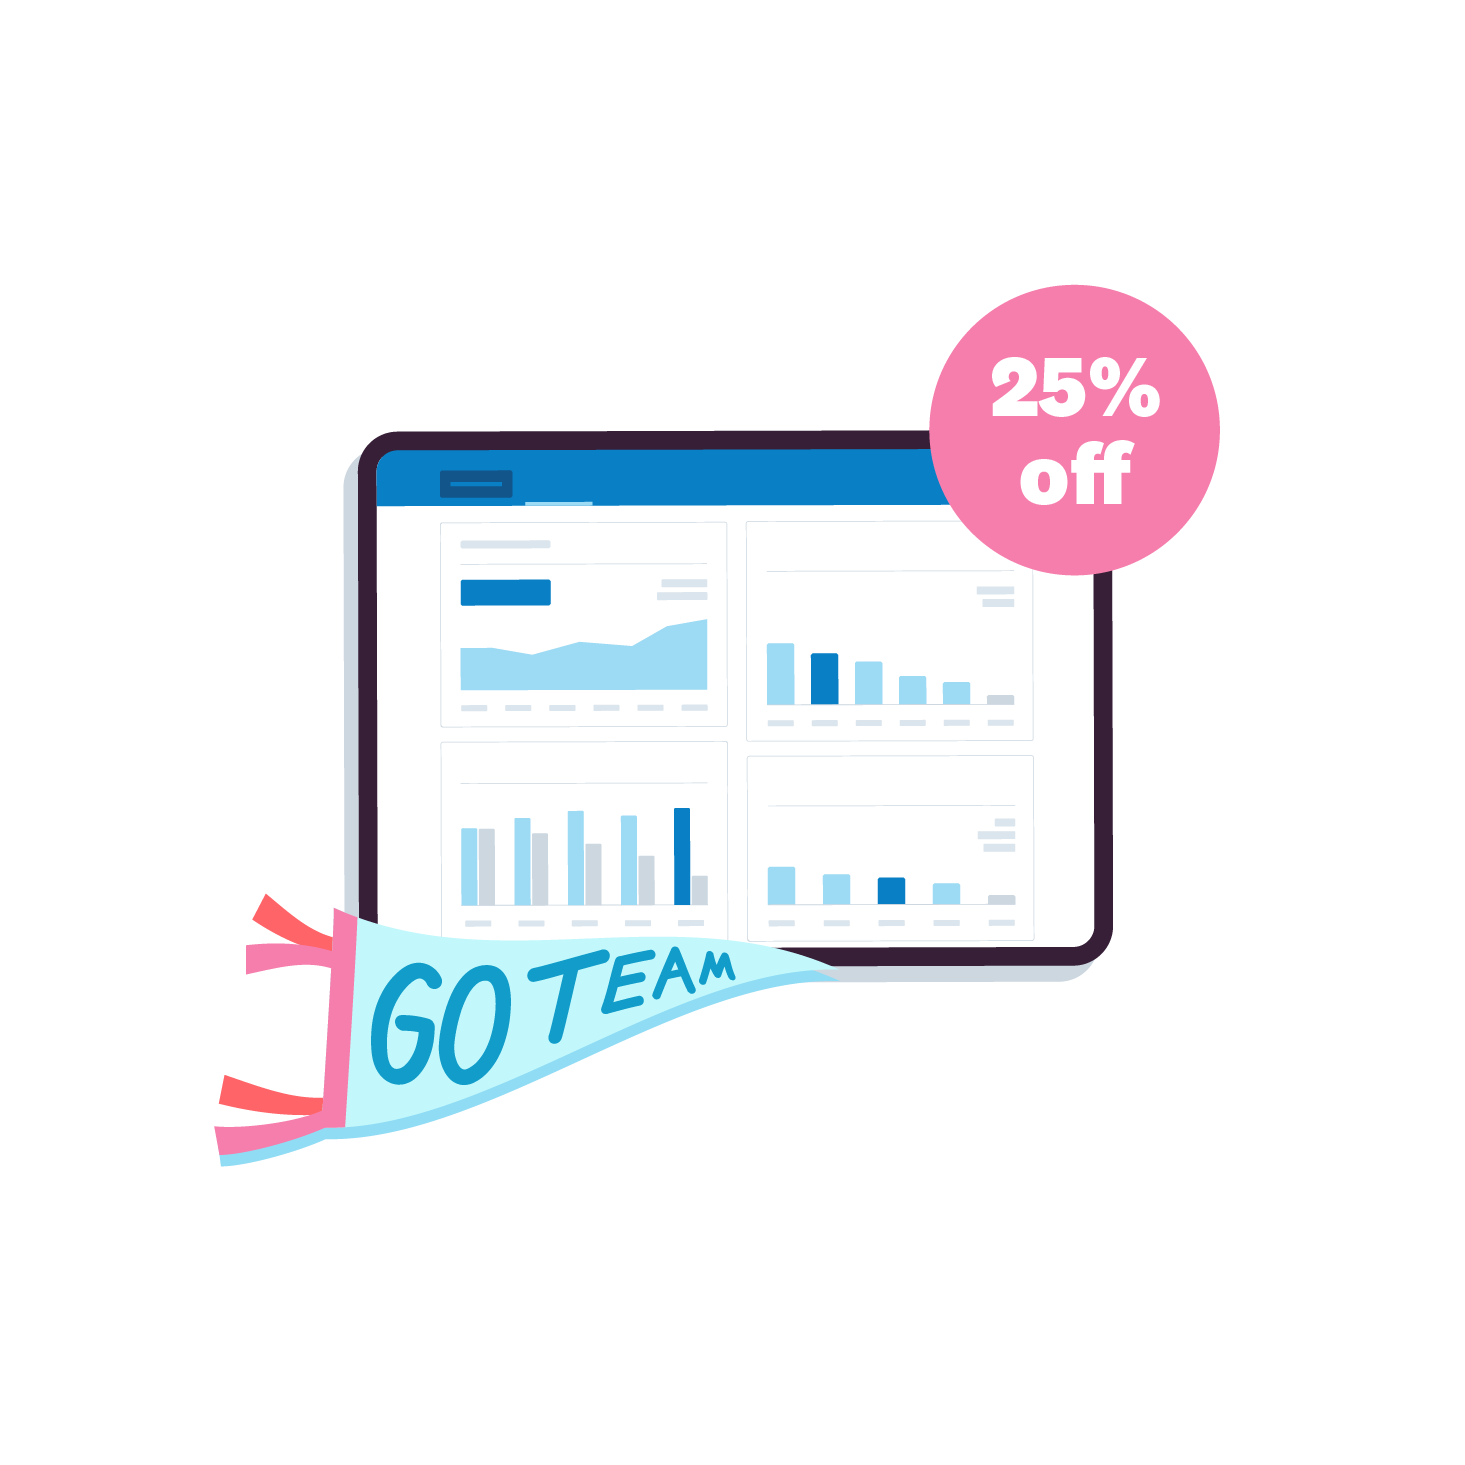 Charts on the Xero dashboard, a 25% off sign, and a banner that says ‘Go Team’.